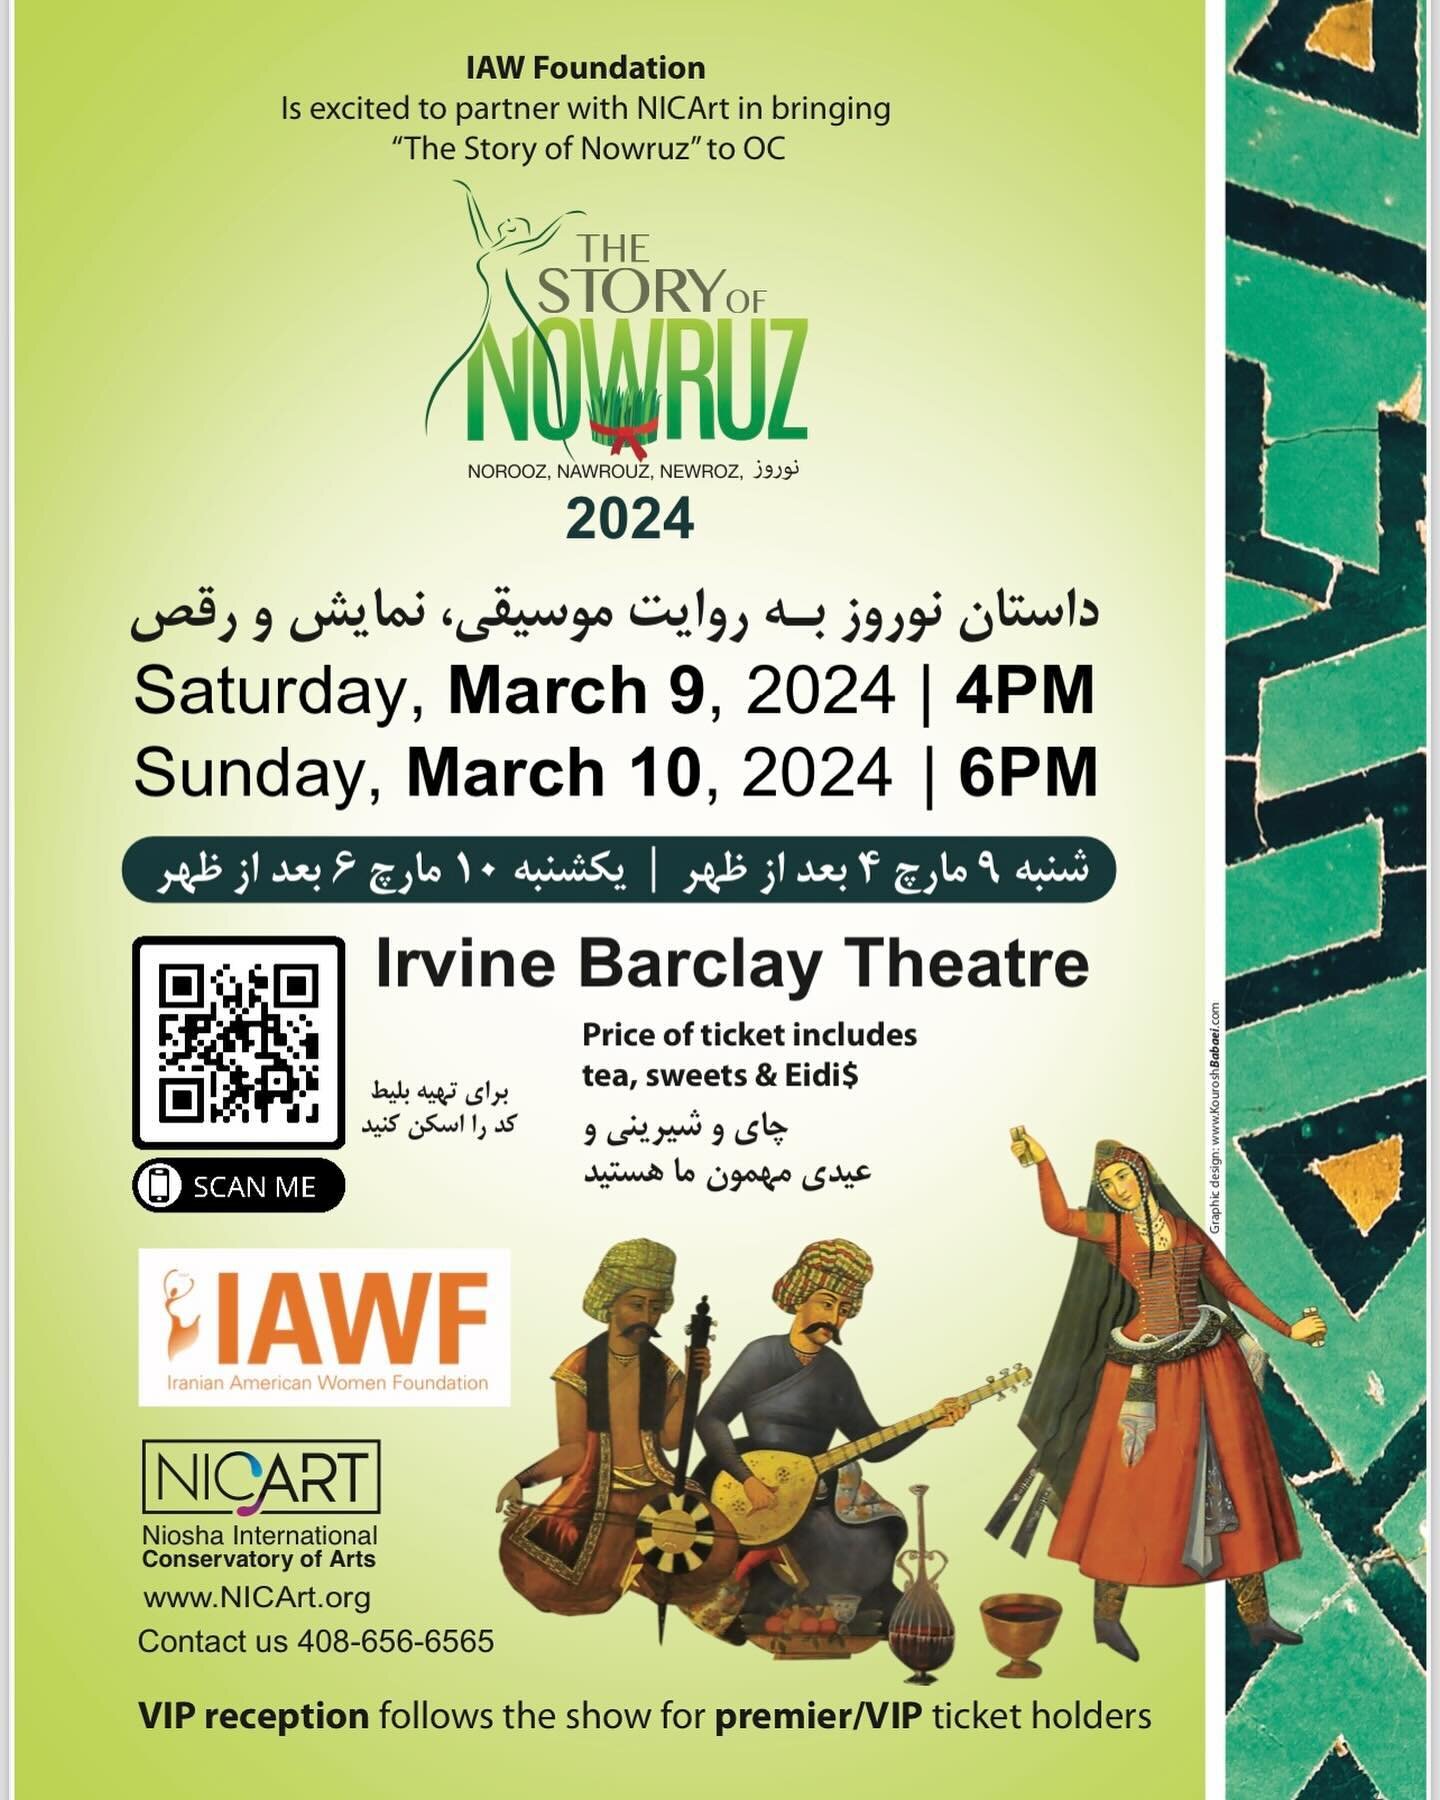 IAW Foundation is partnering with NICArt in bringing &ldquo;The Story of Nowruz&rdquo; to Irvine Barclay Theatre on March 9th &amp; 10th!✨

This vibrant production brings to life the ancient Persian celebration of Nowruz, the New Year marked by the a